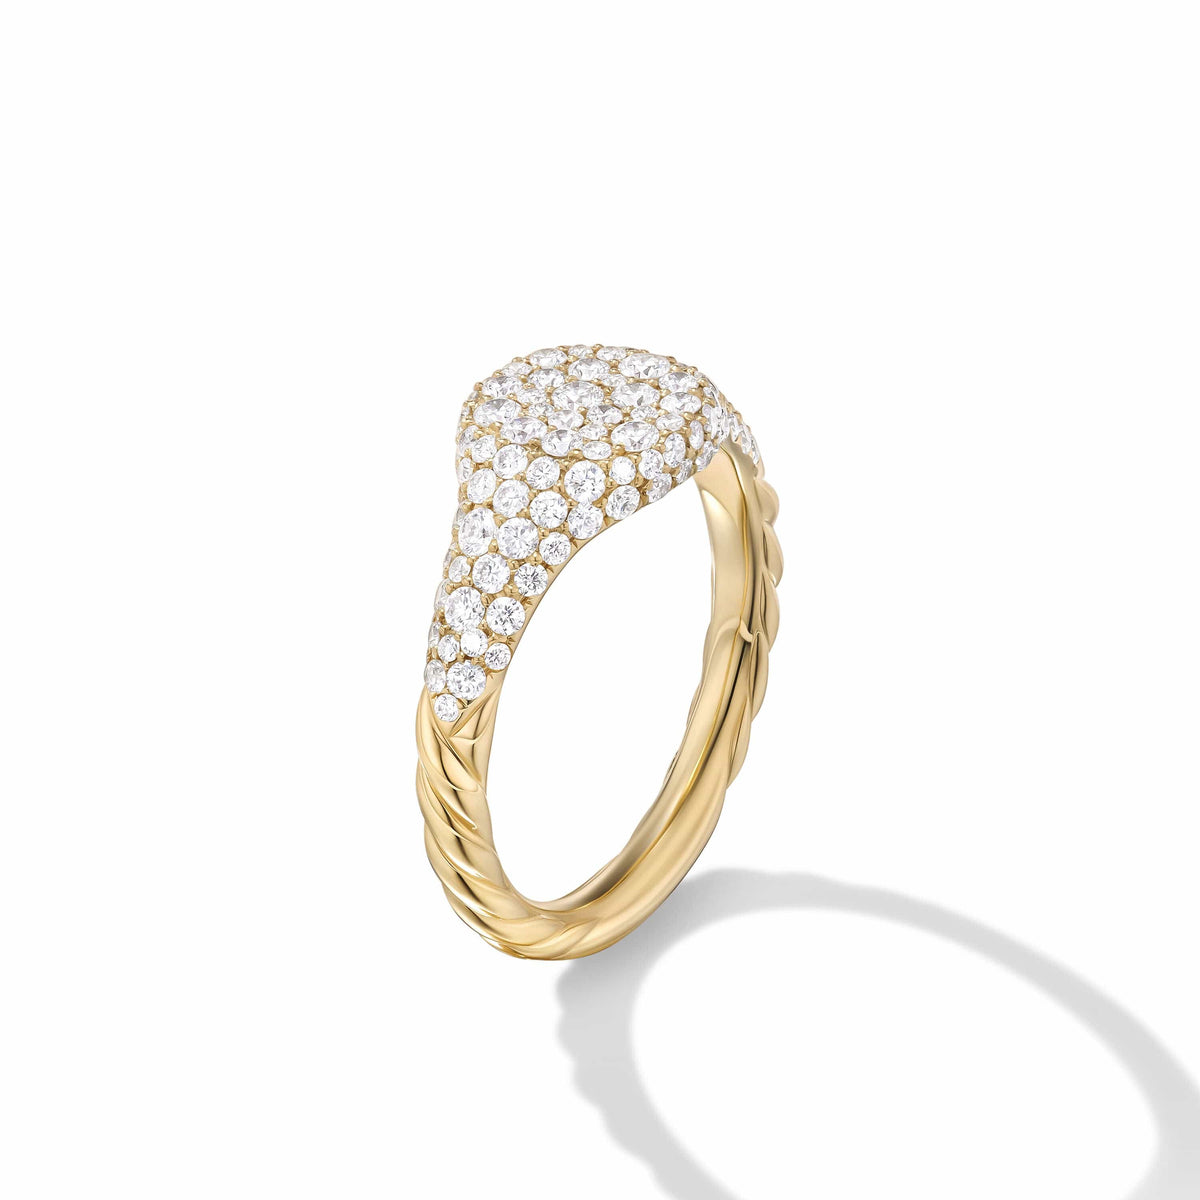 Petite Pavé Pinky Ring in 18K Yellow Gold with Diamonds